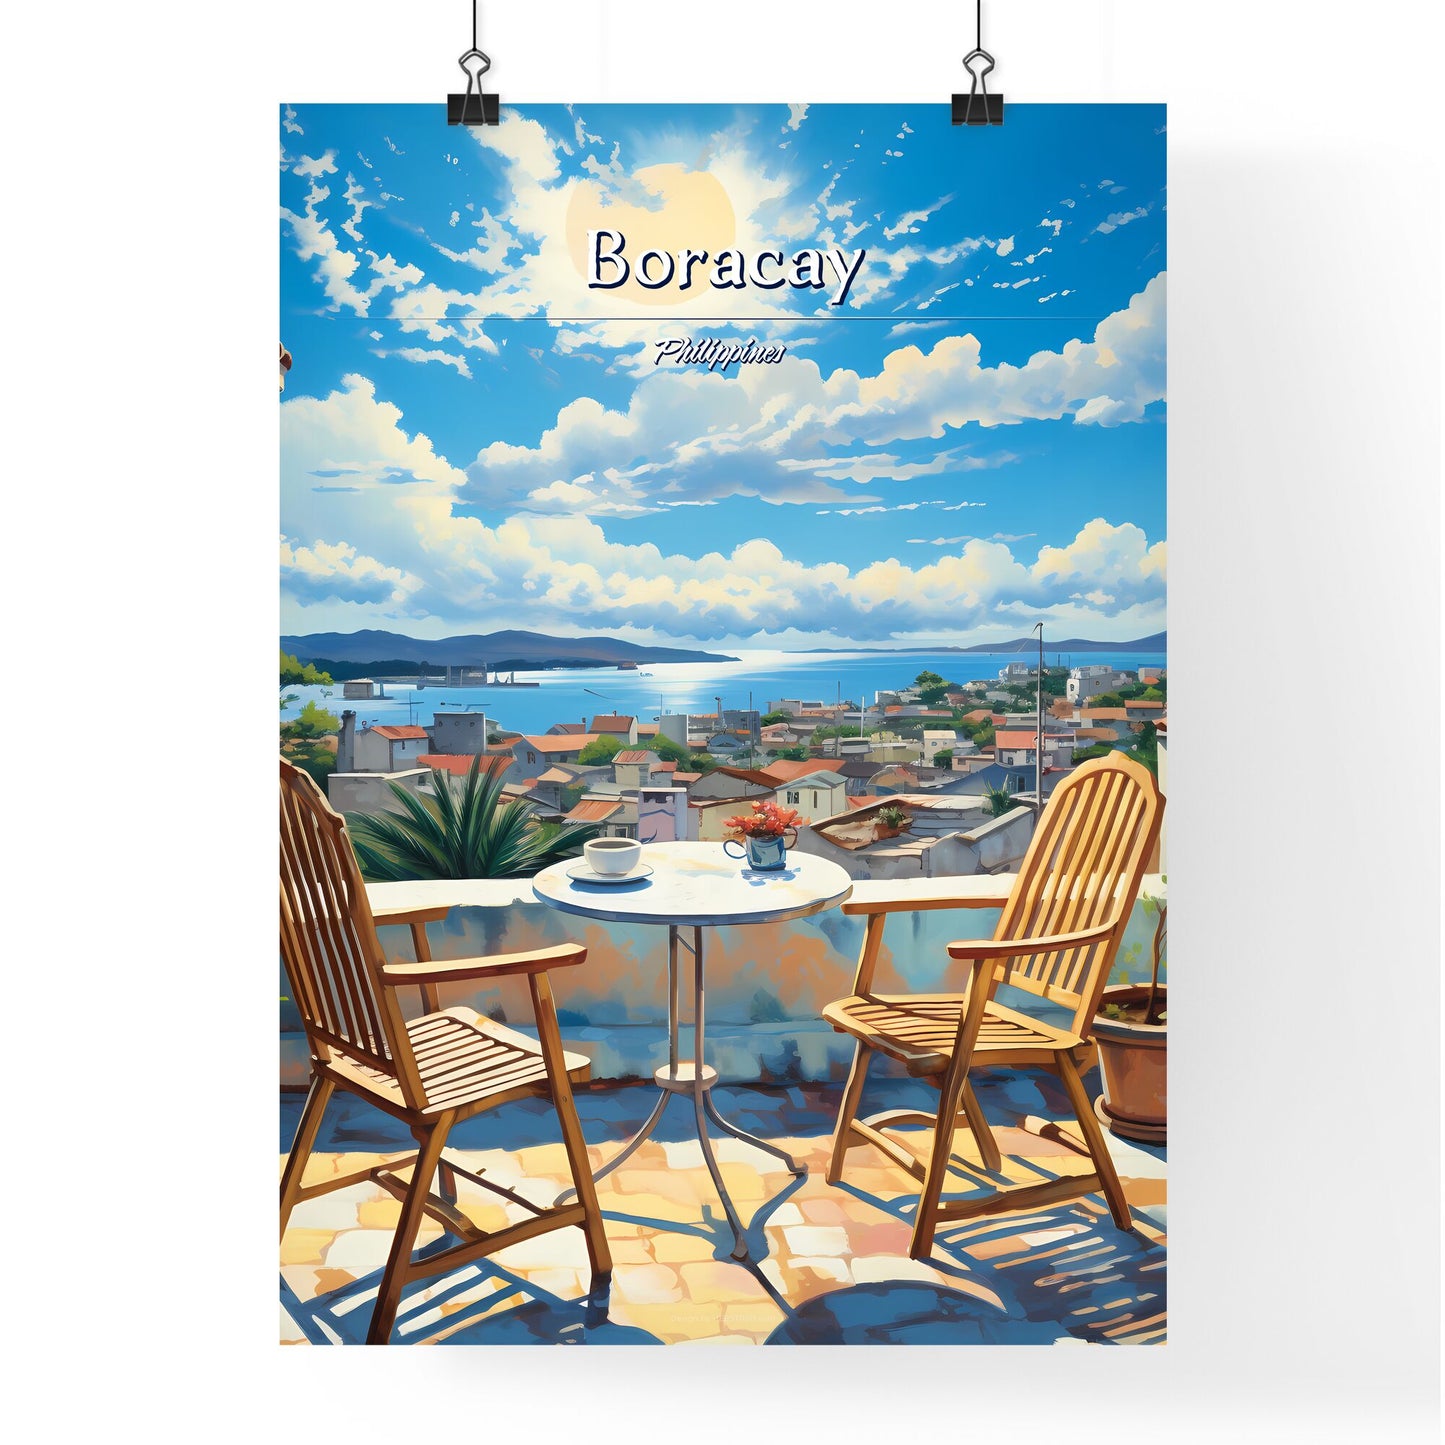 On the roofs of Boracay, Philippines - Art print of a table and chairs on a balcony overlooking a city Default Title